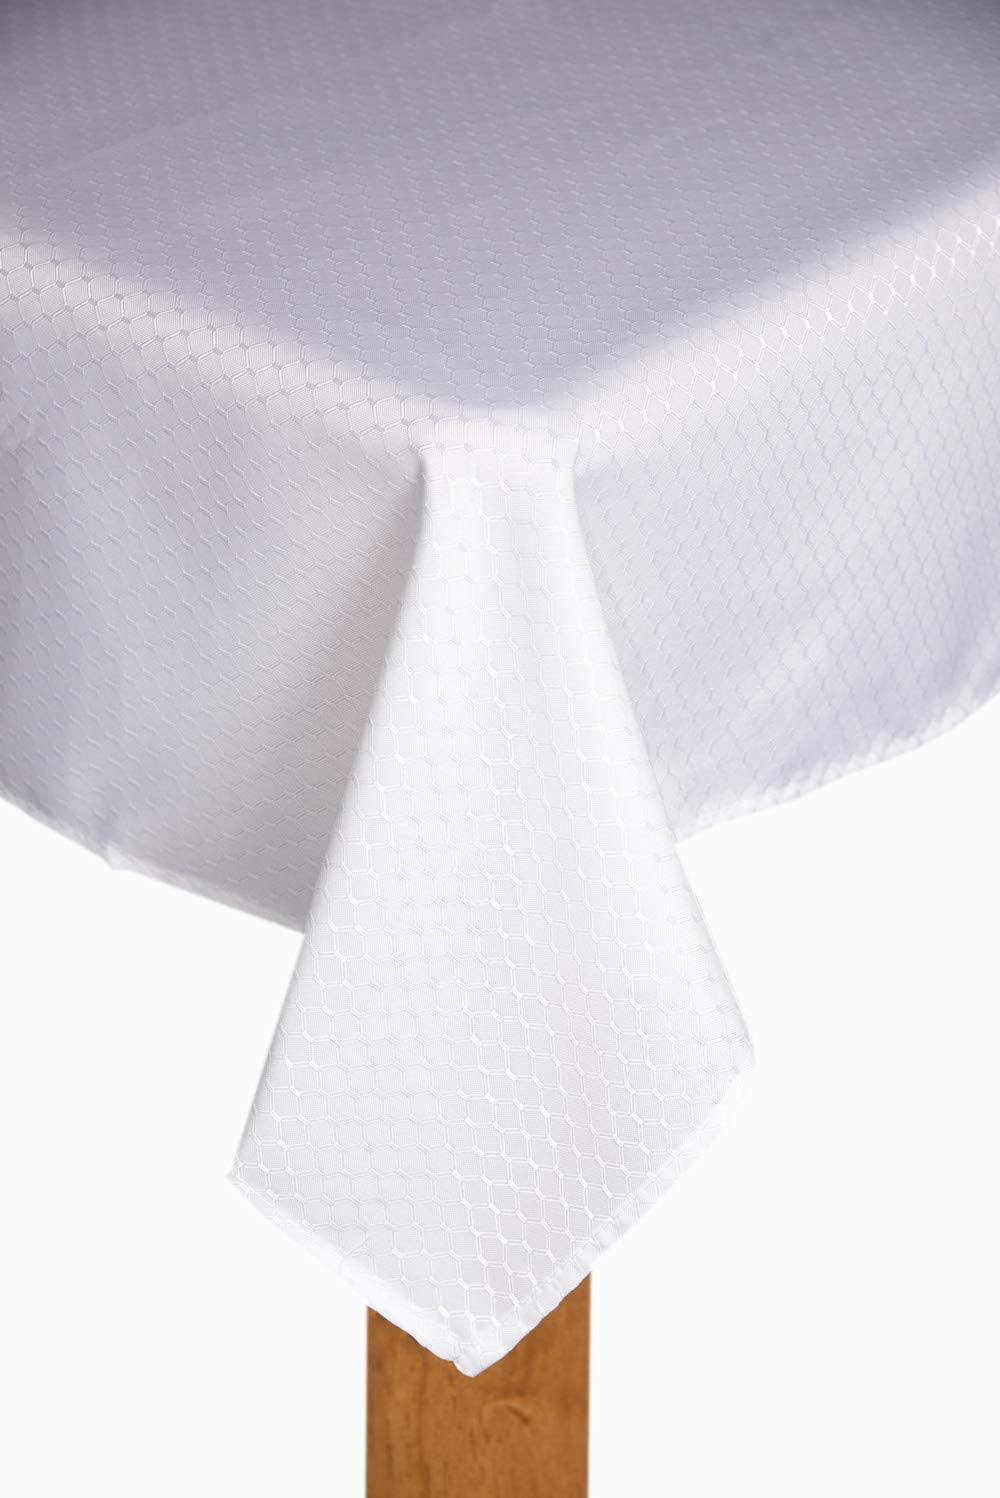 Lintex Linens Chelton Honeycomb 150cm x 260cm 100% Polyester Tablecloth in White | Textiles | Free Shipping On All orders | Best Price Guarantee